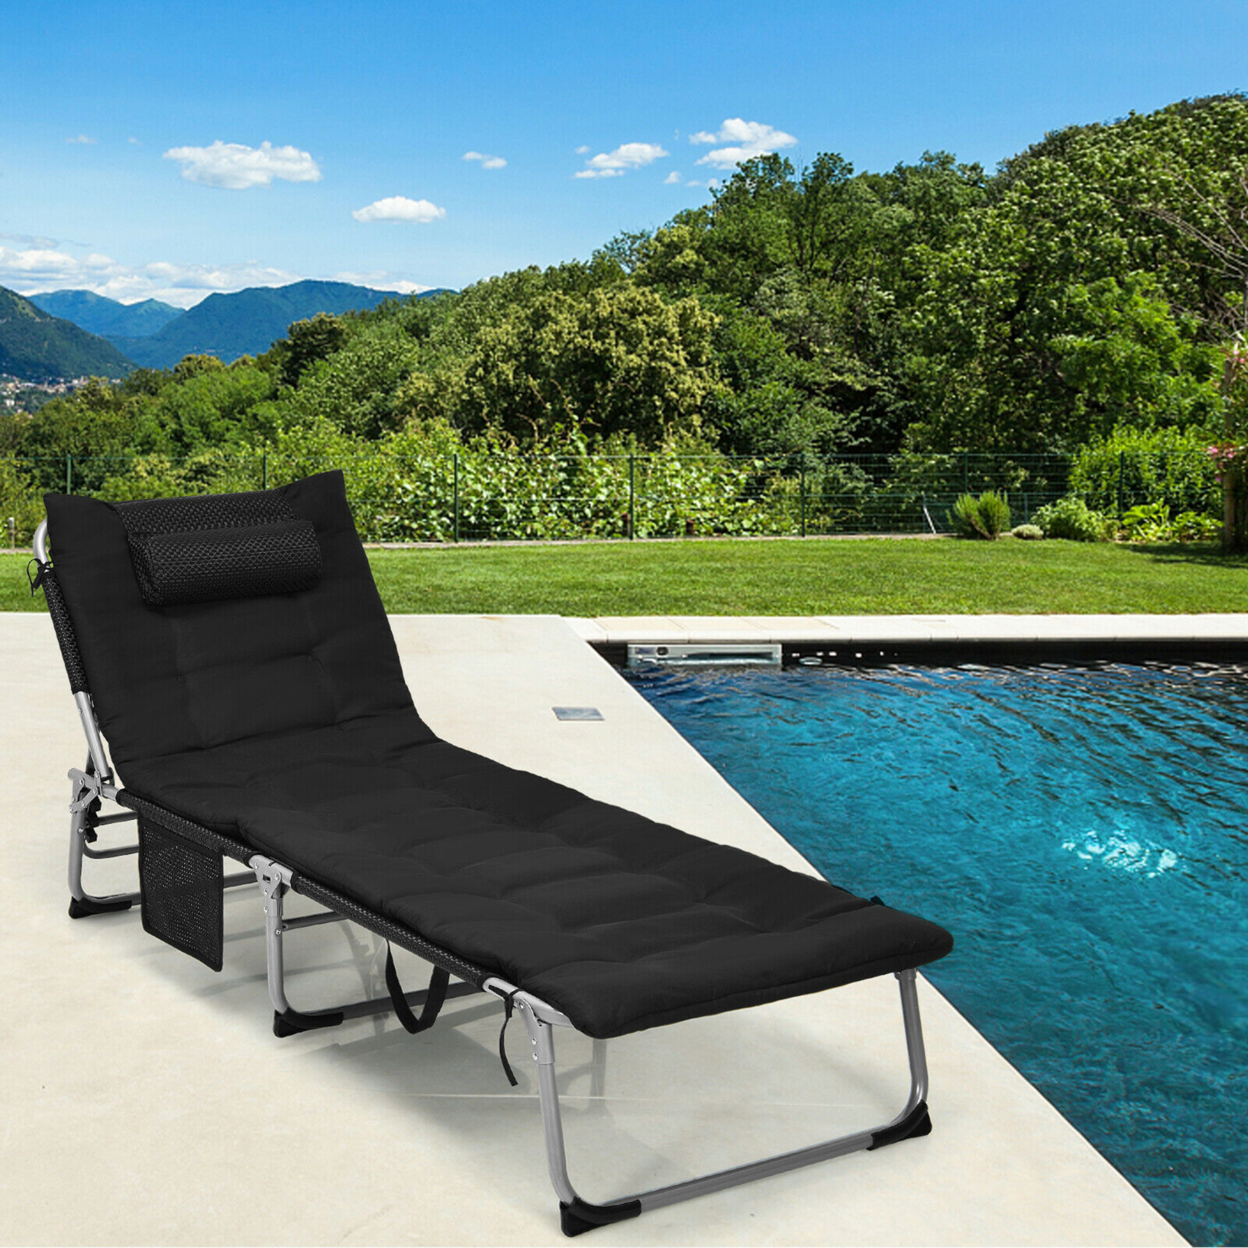 4-Fold Oversize Padded Folding Chaise Lounge Chair Reclining Chair - Beige